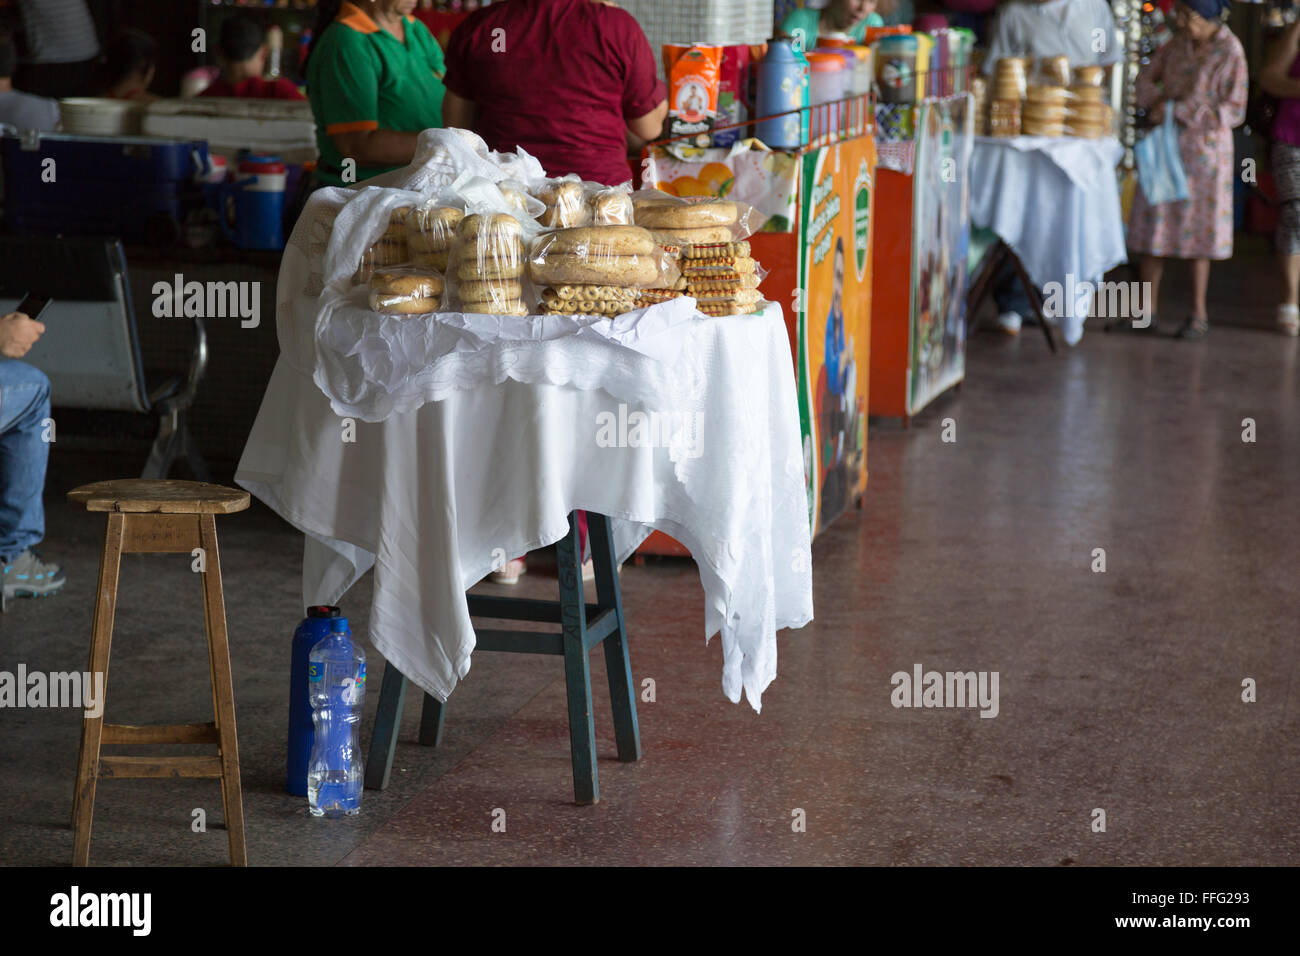 Asuncion, Paraguay. 13th February, 2016. Typical Paraguayan chipa are selling at the Terminal de Ómnibus de Asunción (Asuncion Bus Terminal), is seen during this sunny morning in Asuncion, Paraguay. Chipa is a type of baked, cheese-flavored rolls, a traditional snack and breakfast food in Paraguay. © Andre M. Chang/ARDUOPRESS/Alamy Live News Stock Photo